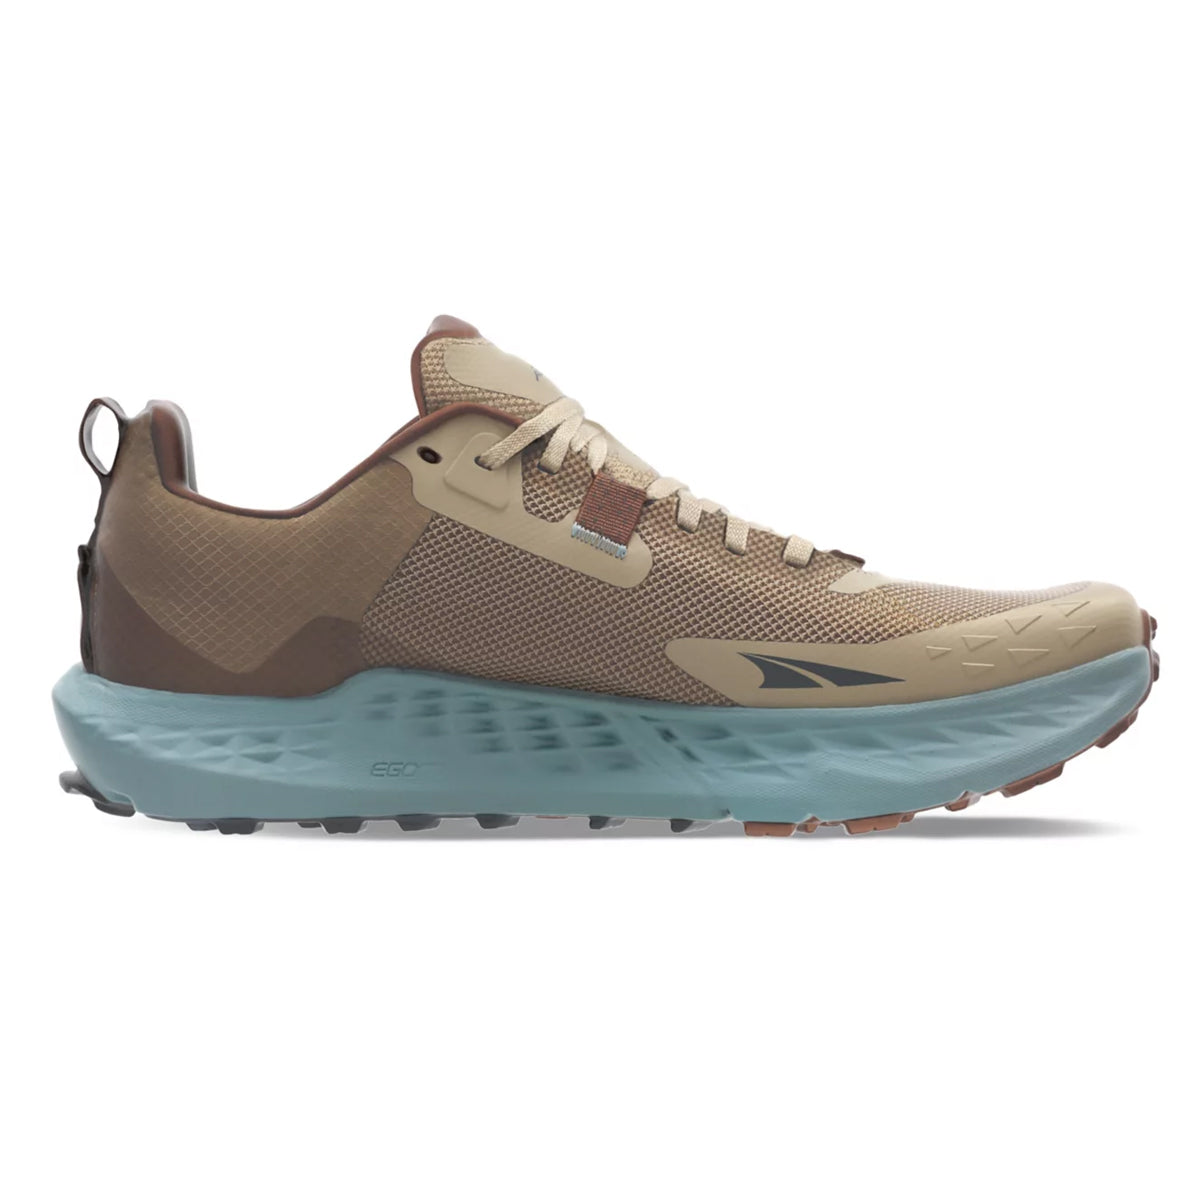 Altra Timp 5 in Brown & Tan by GOHUNT | Altra - GOHUNT Shop